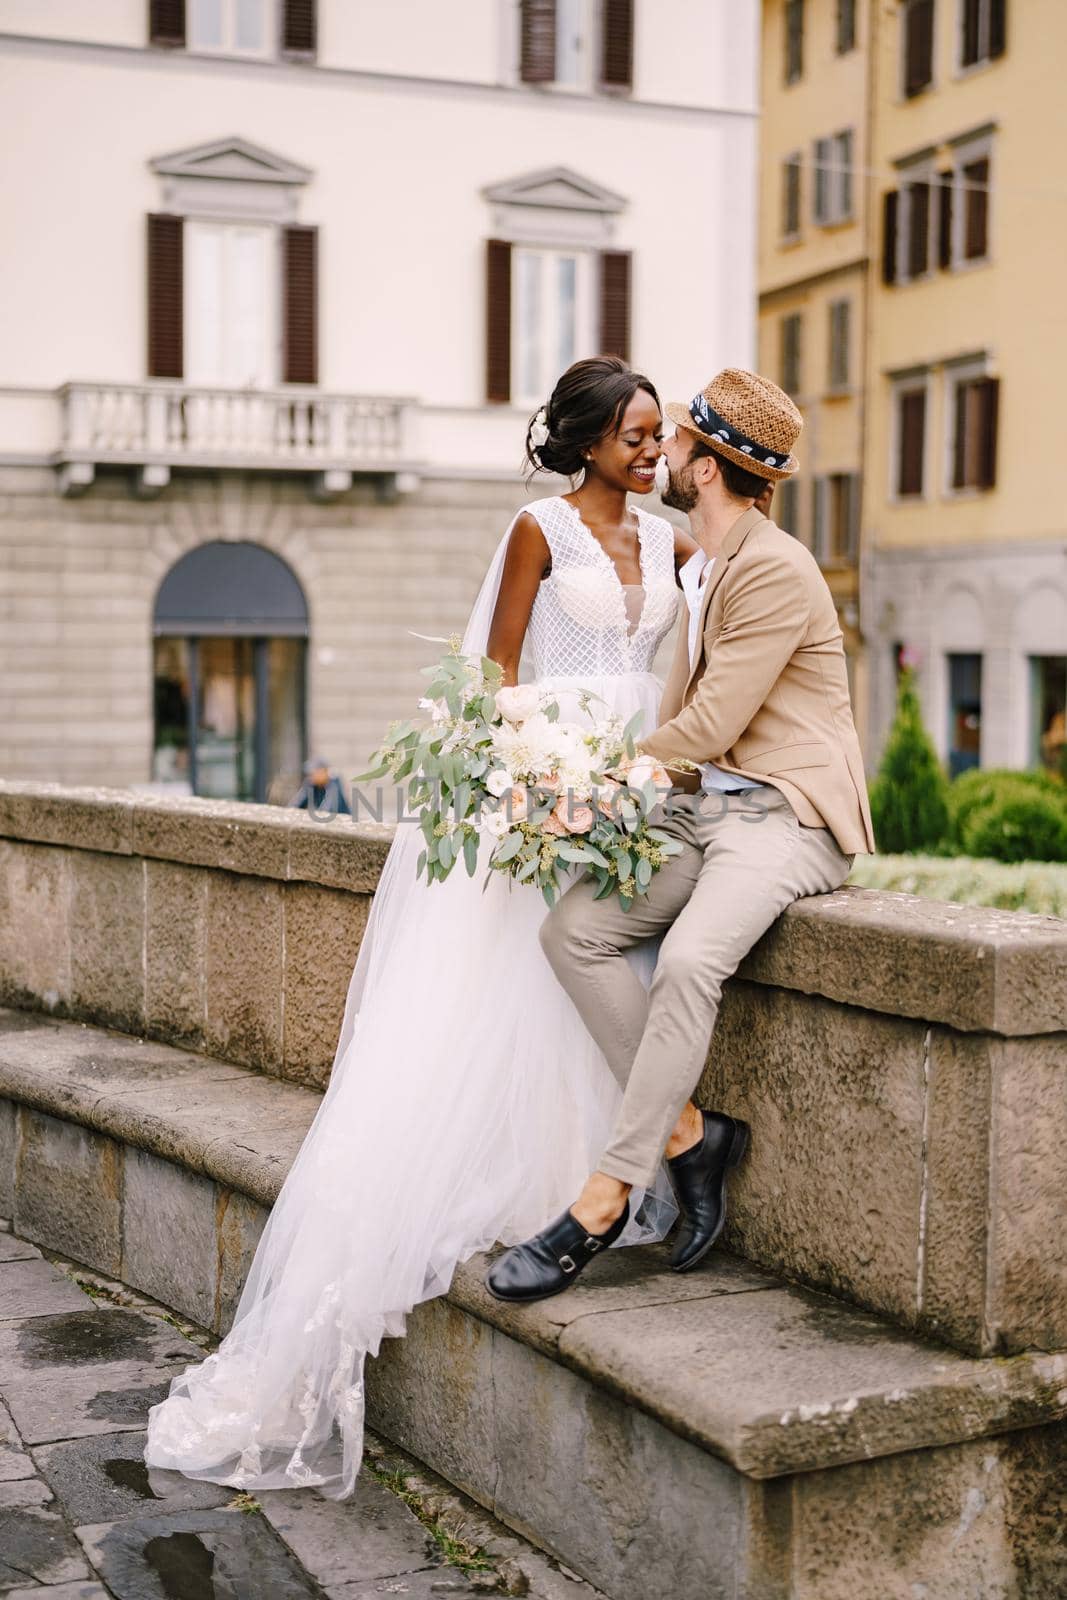 Mixed-race wedding couple. Wedding in Florence, Italy. African-American bride in a white dress with a long veil and a bouquet, and Caucasian groom in a sandy jacket and straw hat. by Nadtochiy